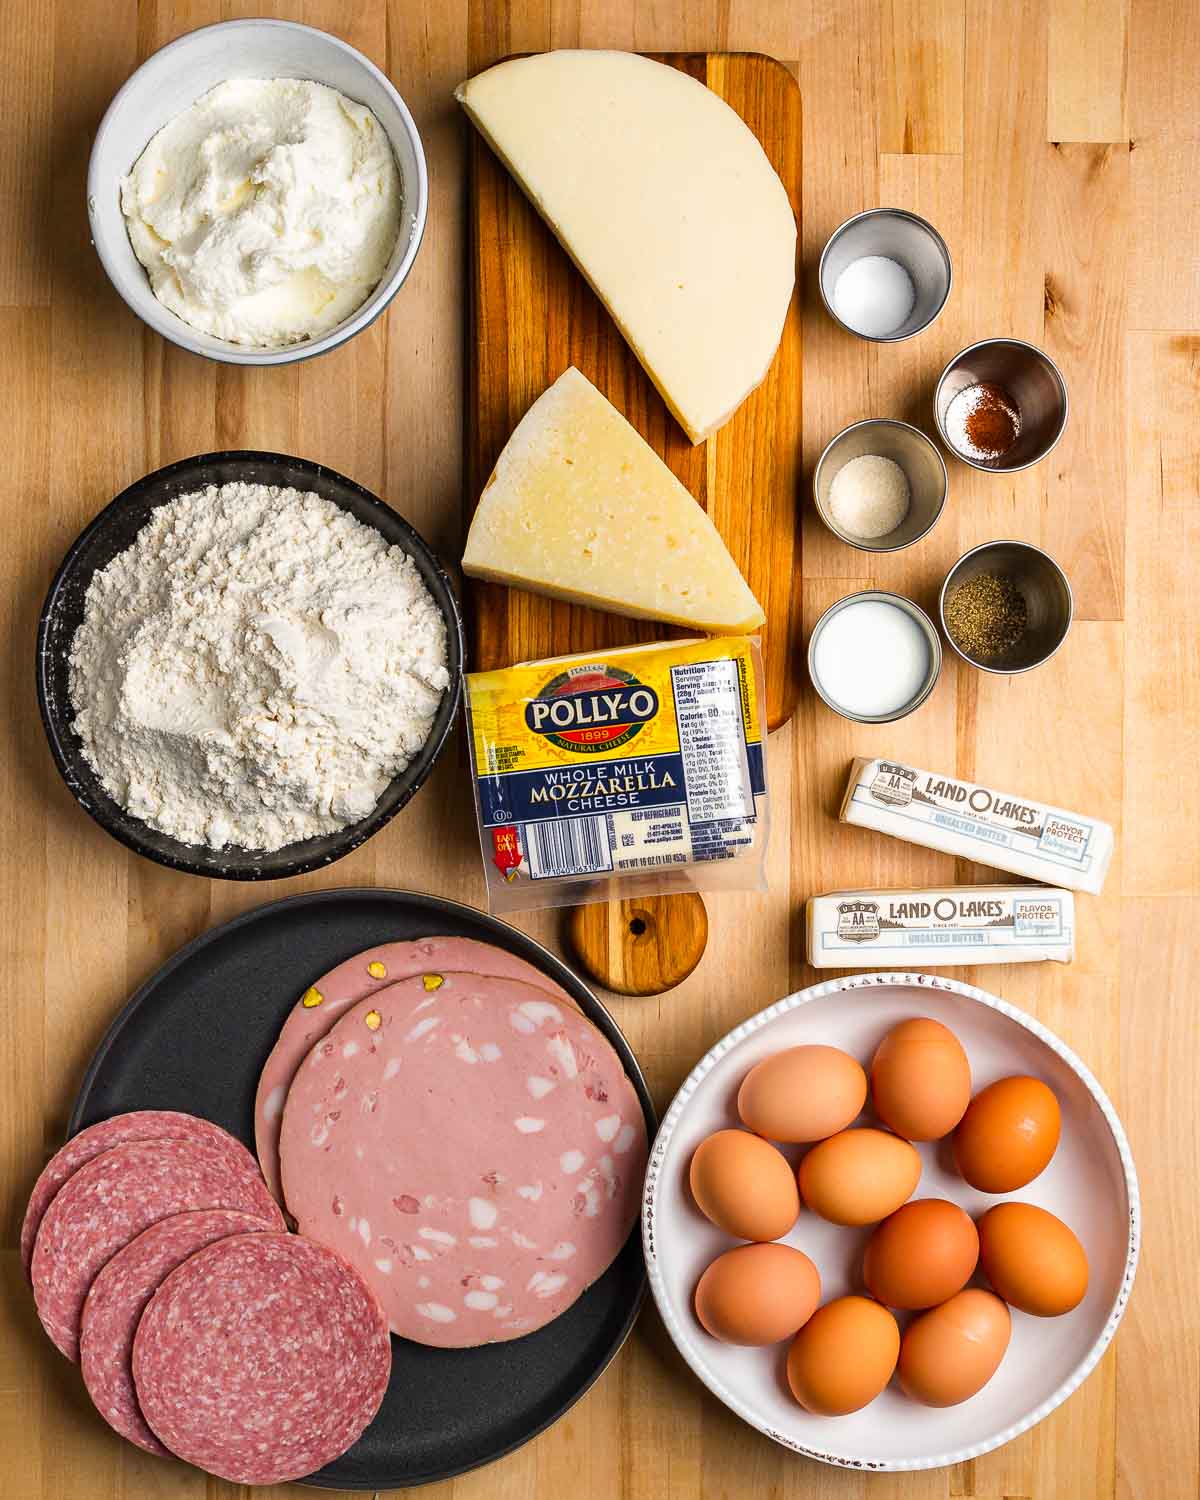 Ingredients shown: cheeses, flour, seasonings, butter, cold cuts, and eggs.